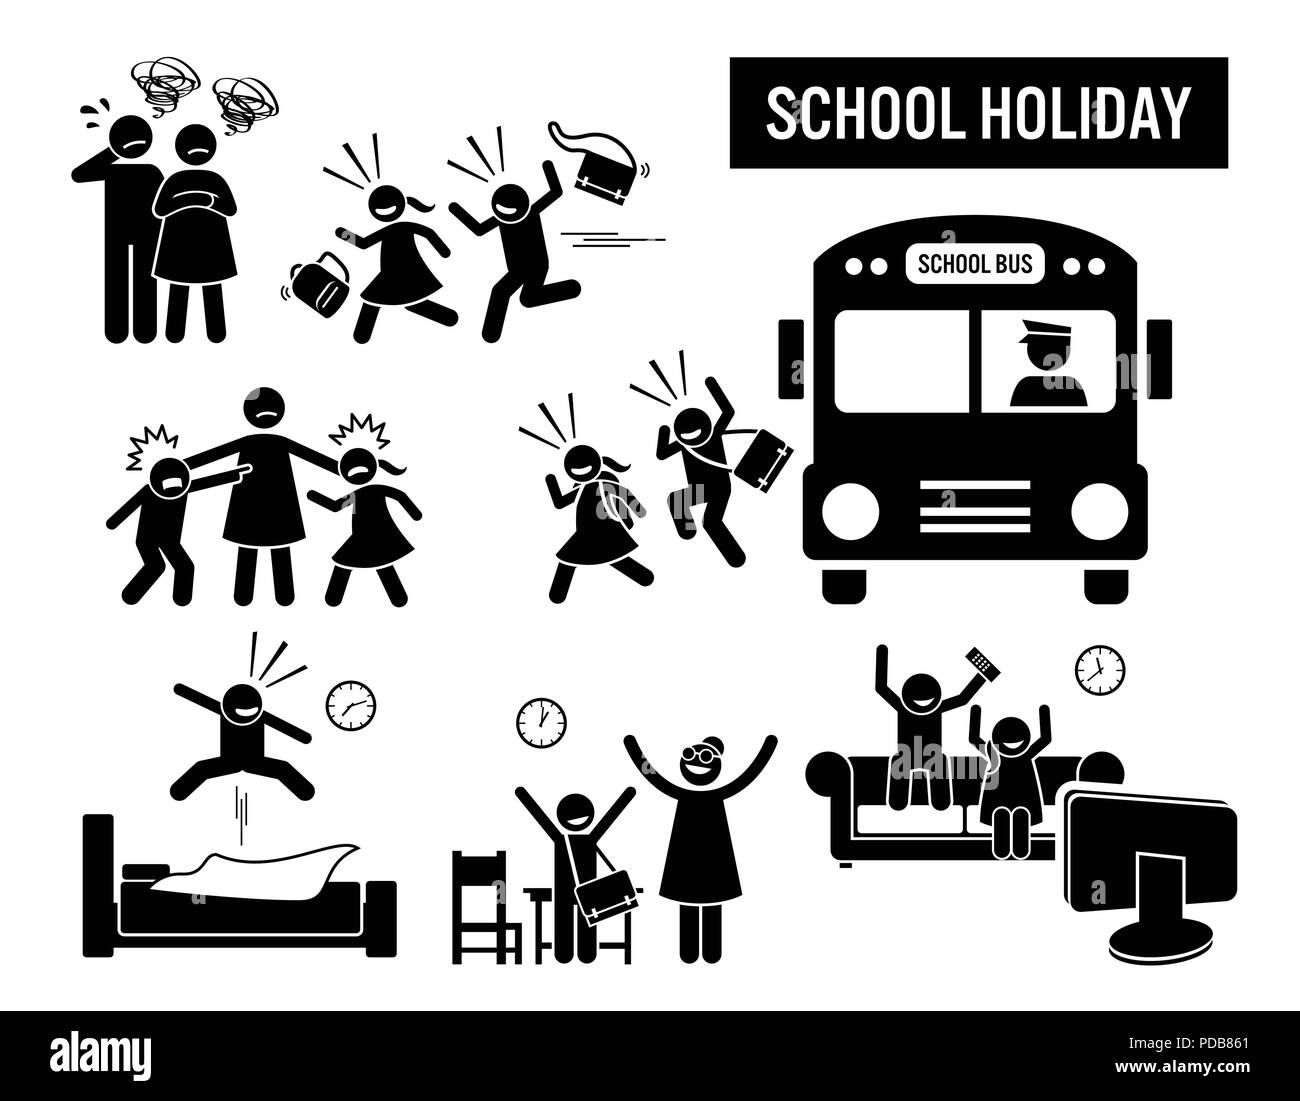 Children school holiday. Stick figure pictogram depicts school children coming back from school holiday. The parent are sad, but the kids are happy. Stock Vector